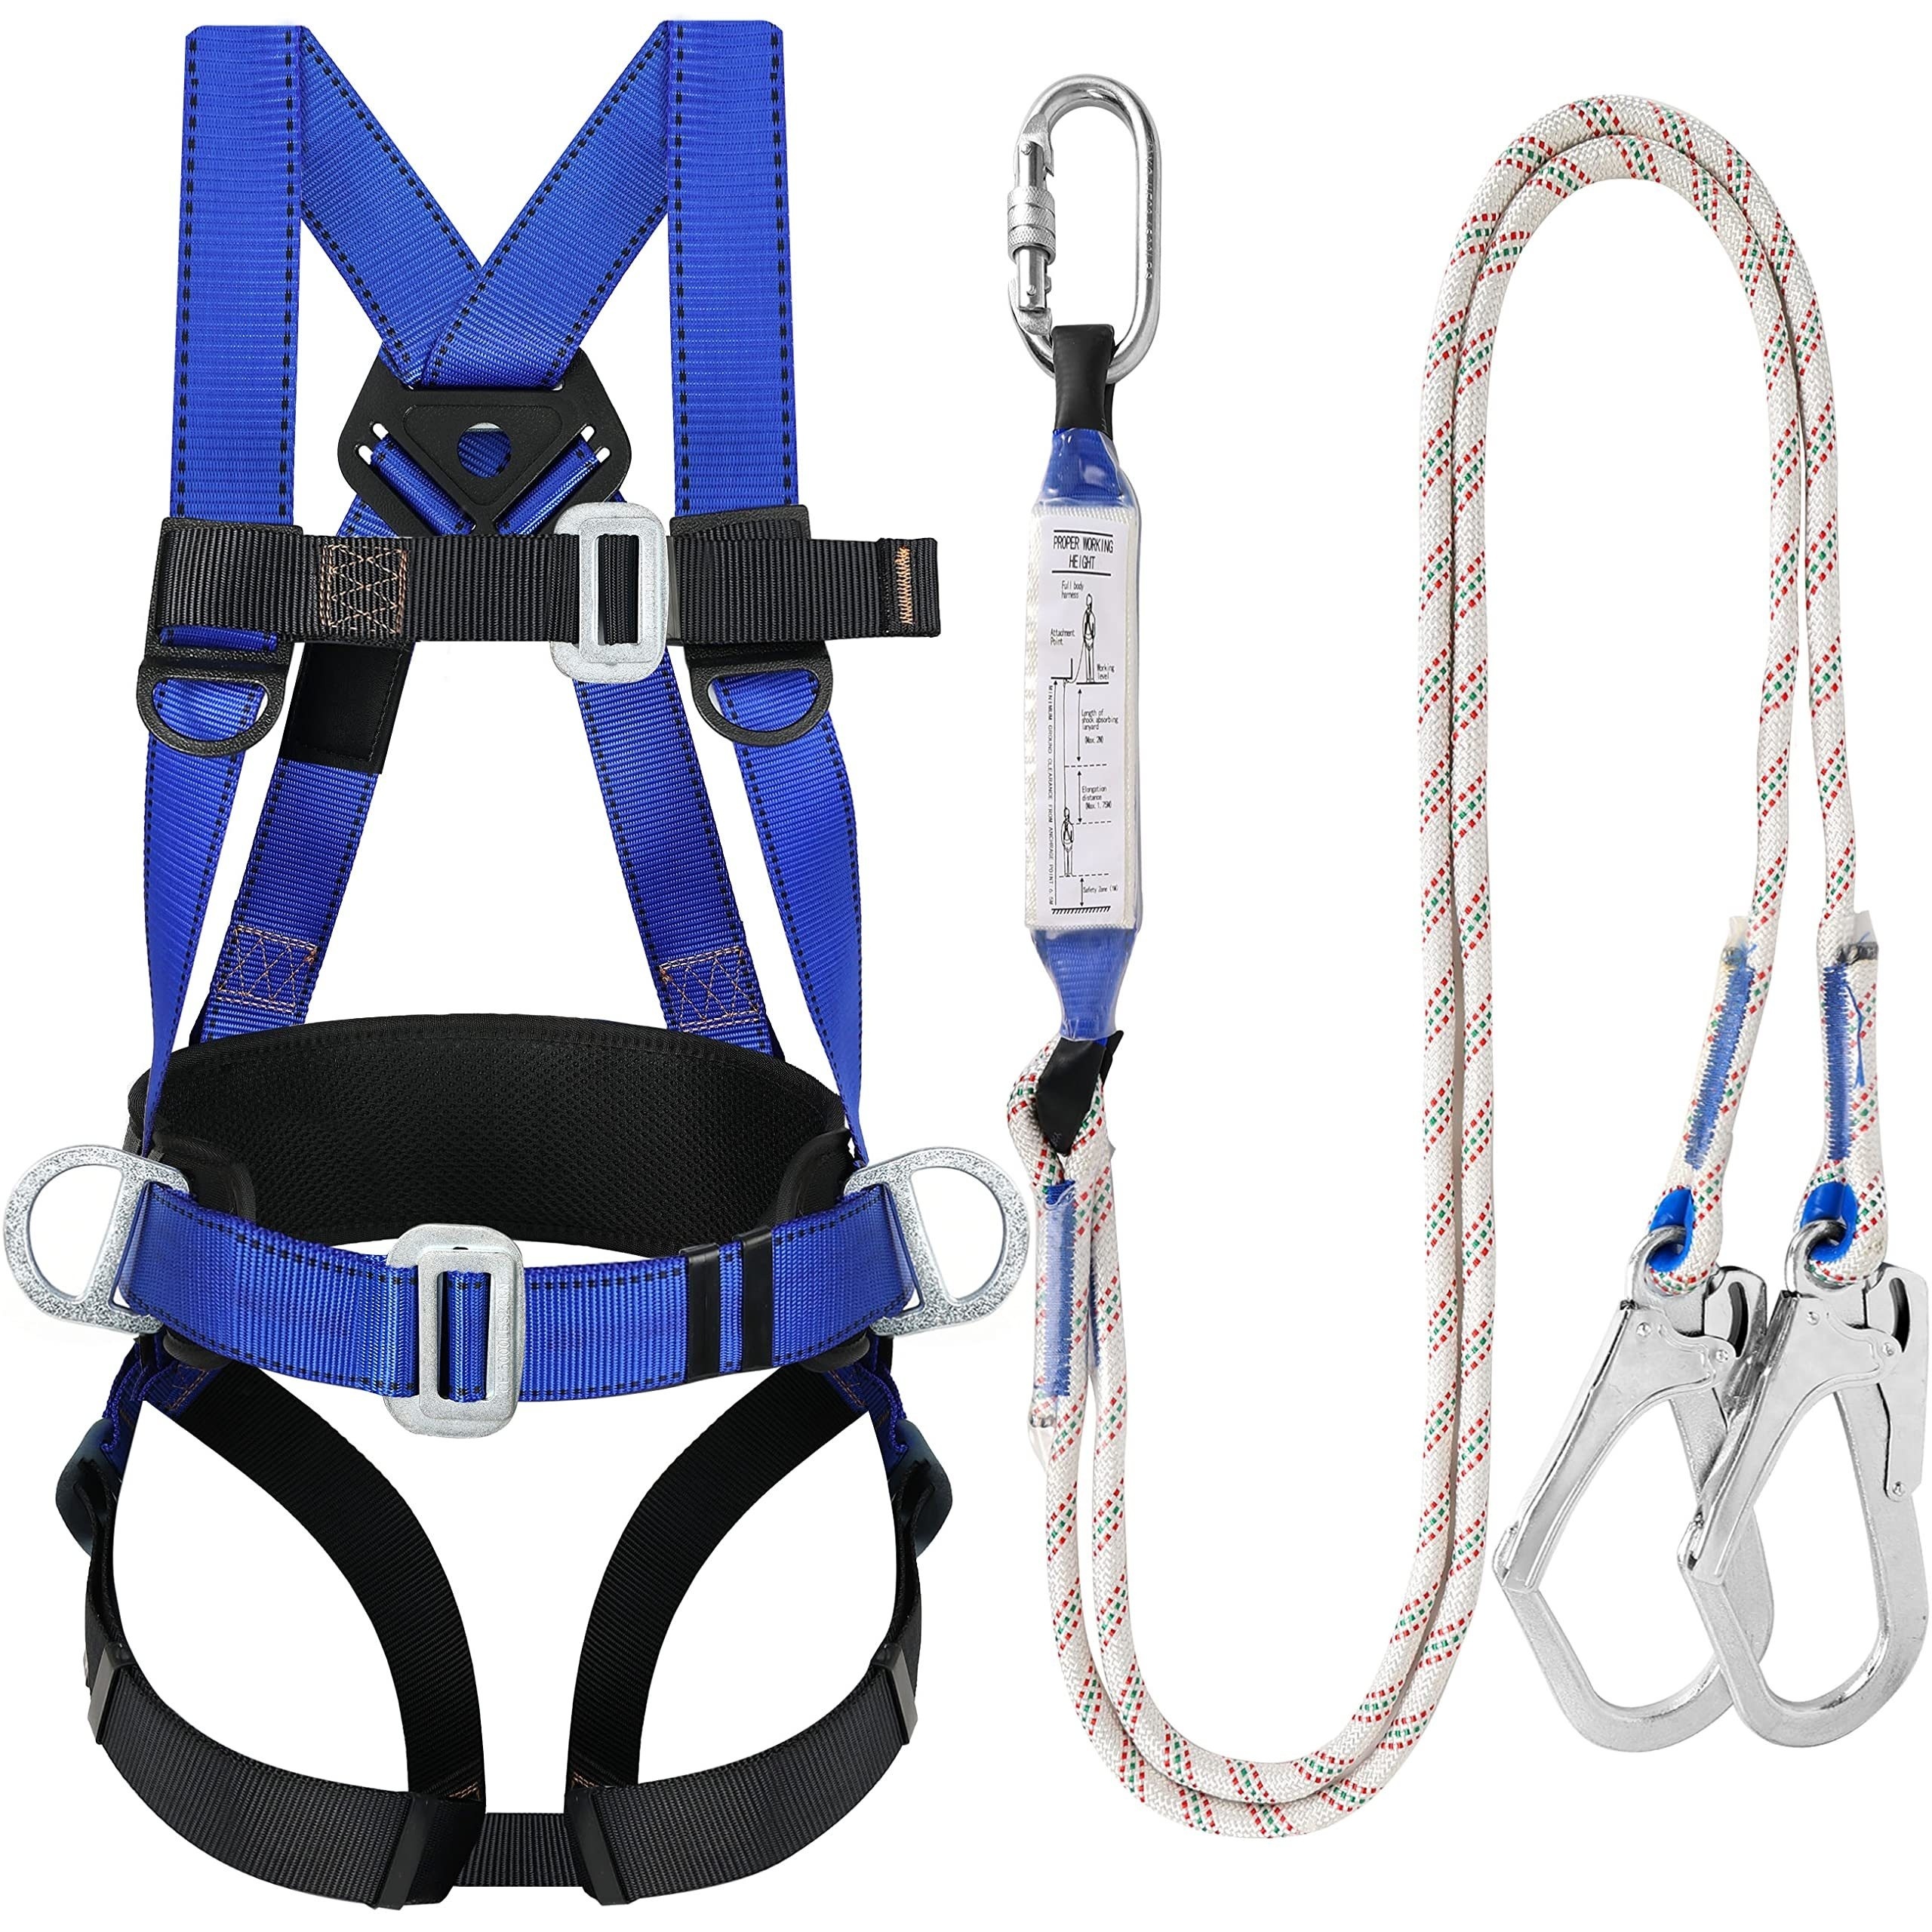 Climbing belts, Thicken Professional Half Body Safety Belt Climbing Gear  for Mountaineering, Tree Climbing, Fire Rescue, Rappelling and Other  Outdoor